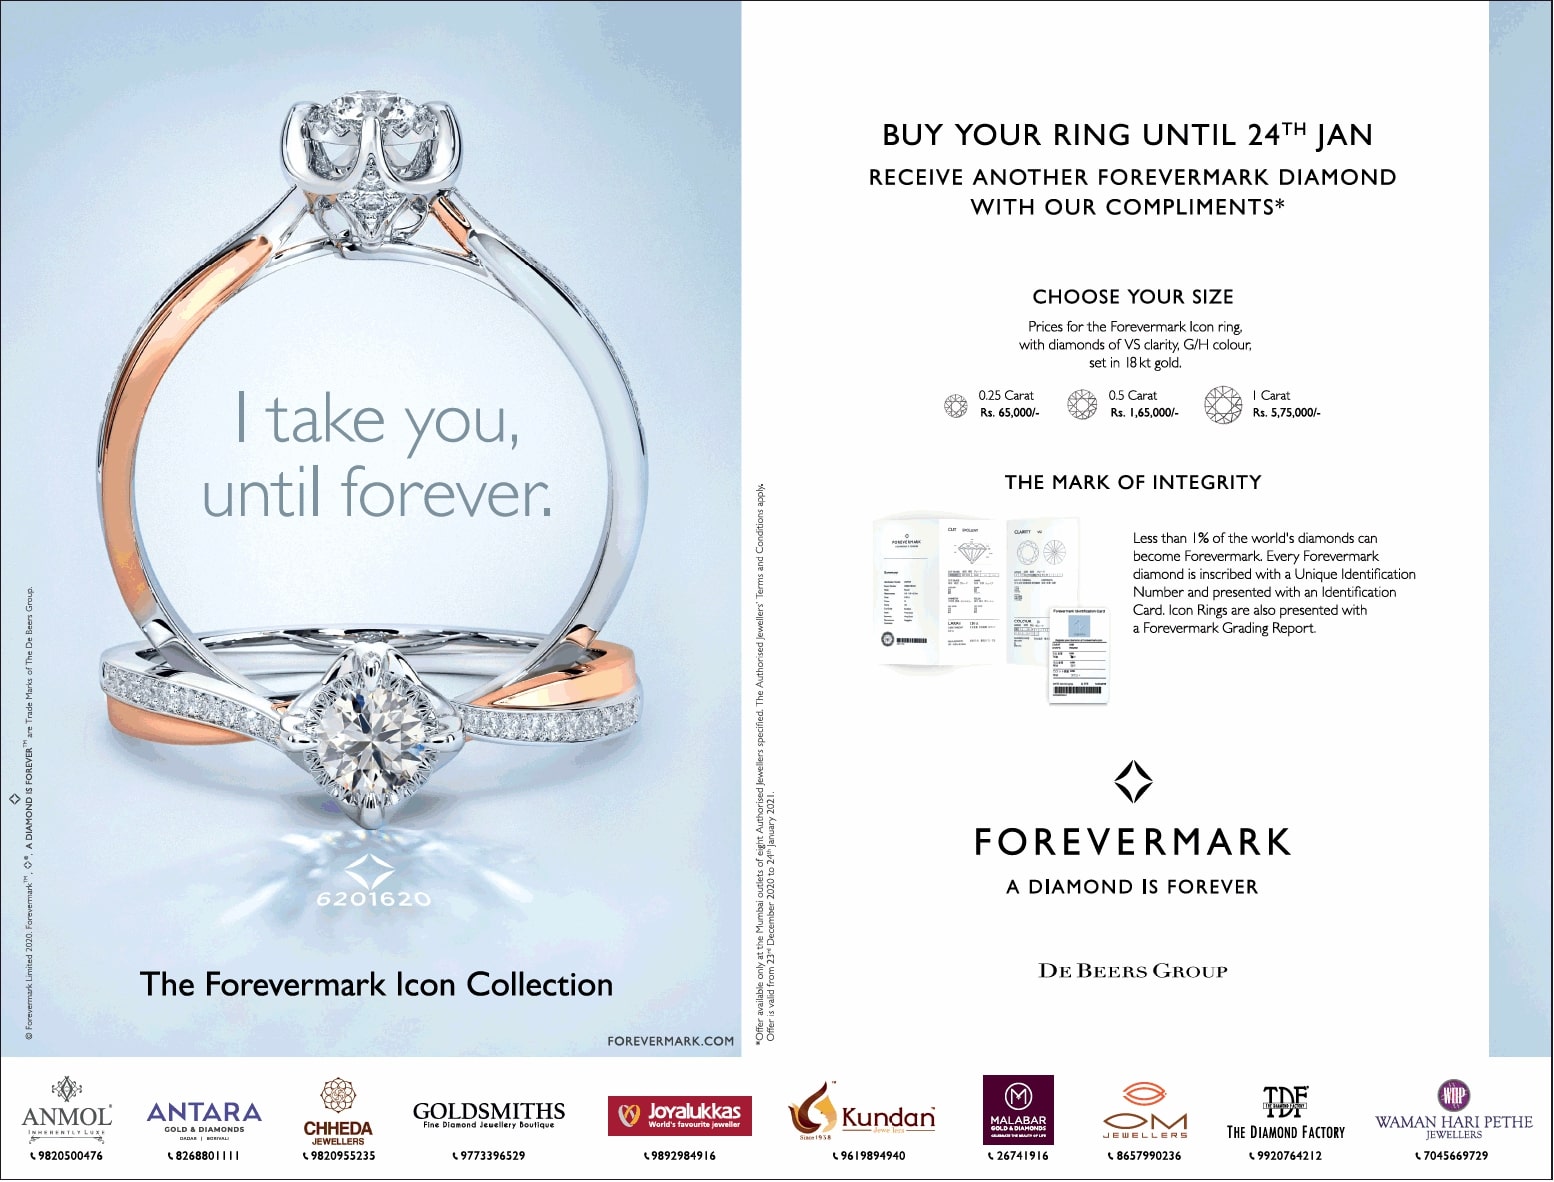 forevermark-buy-your-ring-until-24th-jan-receive-another-forevermark-diamond-with-our-compliments-ad-bombay-times-08-01-2021